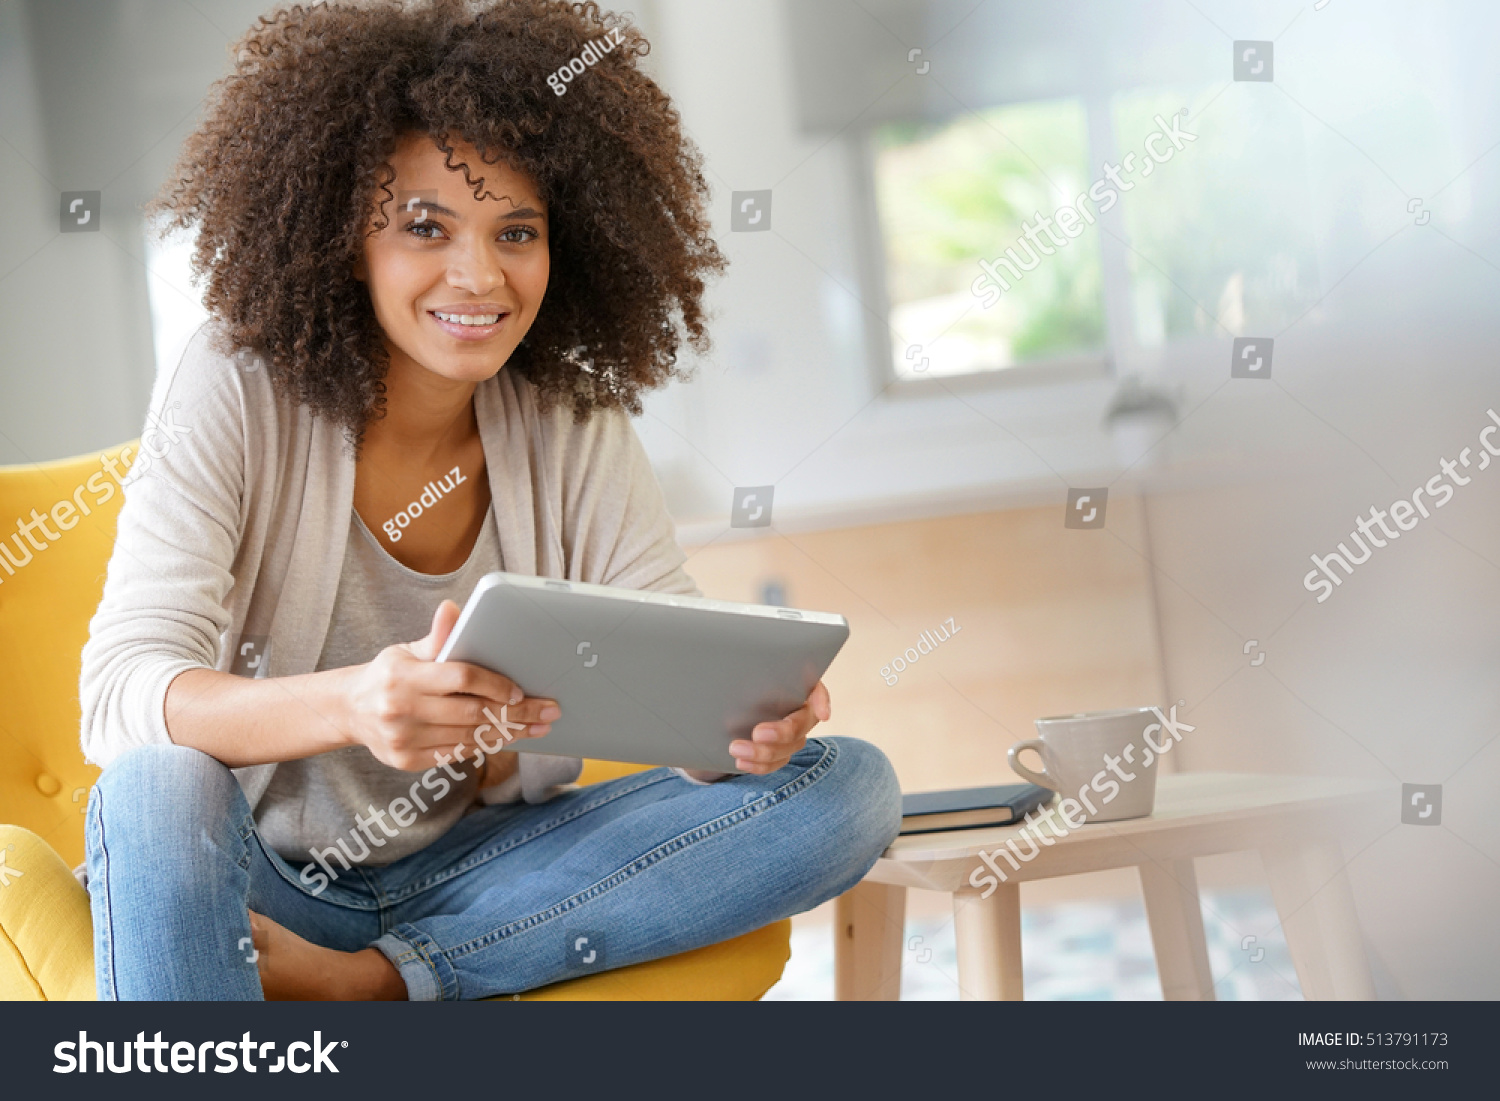 Mixed-race woman websurfing on digital tablet at home #513791173